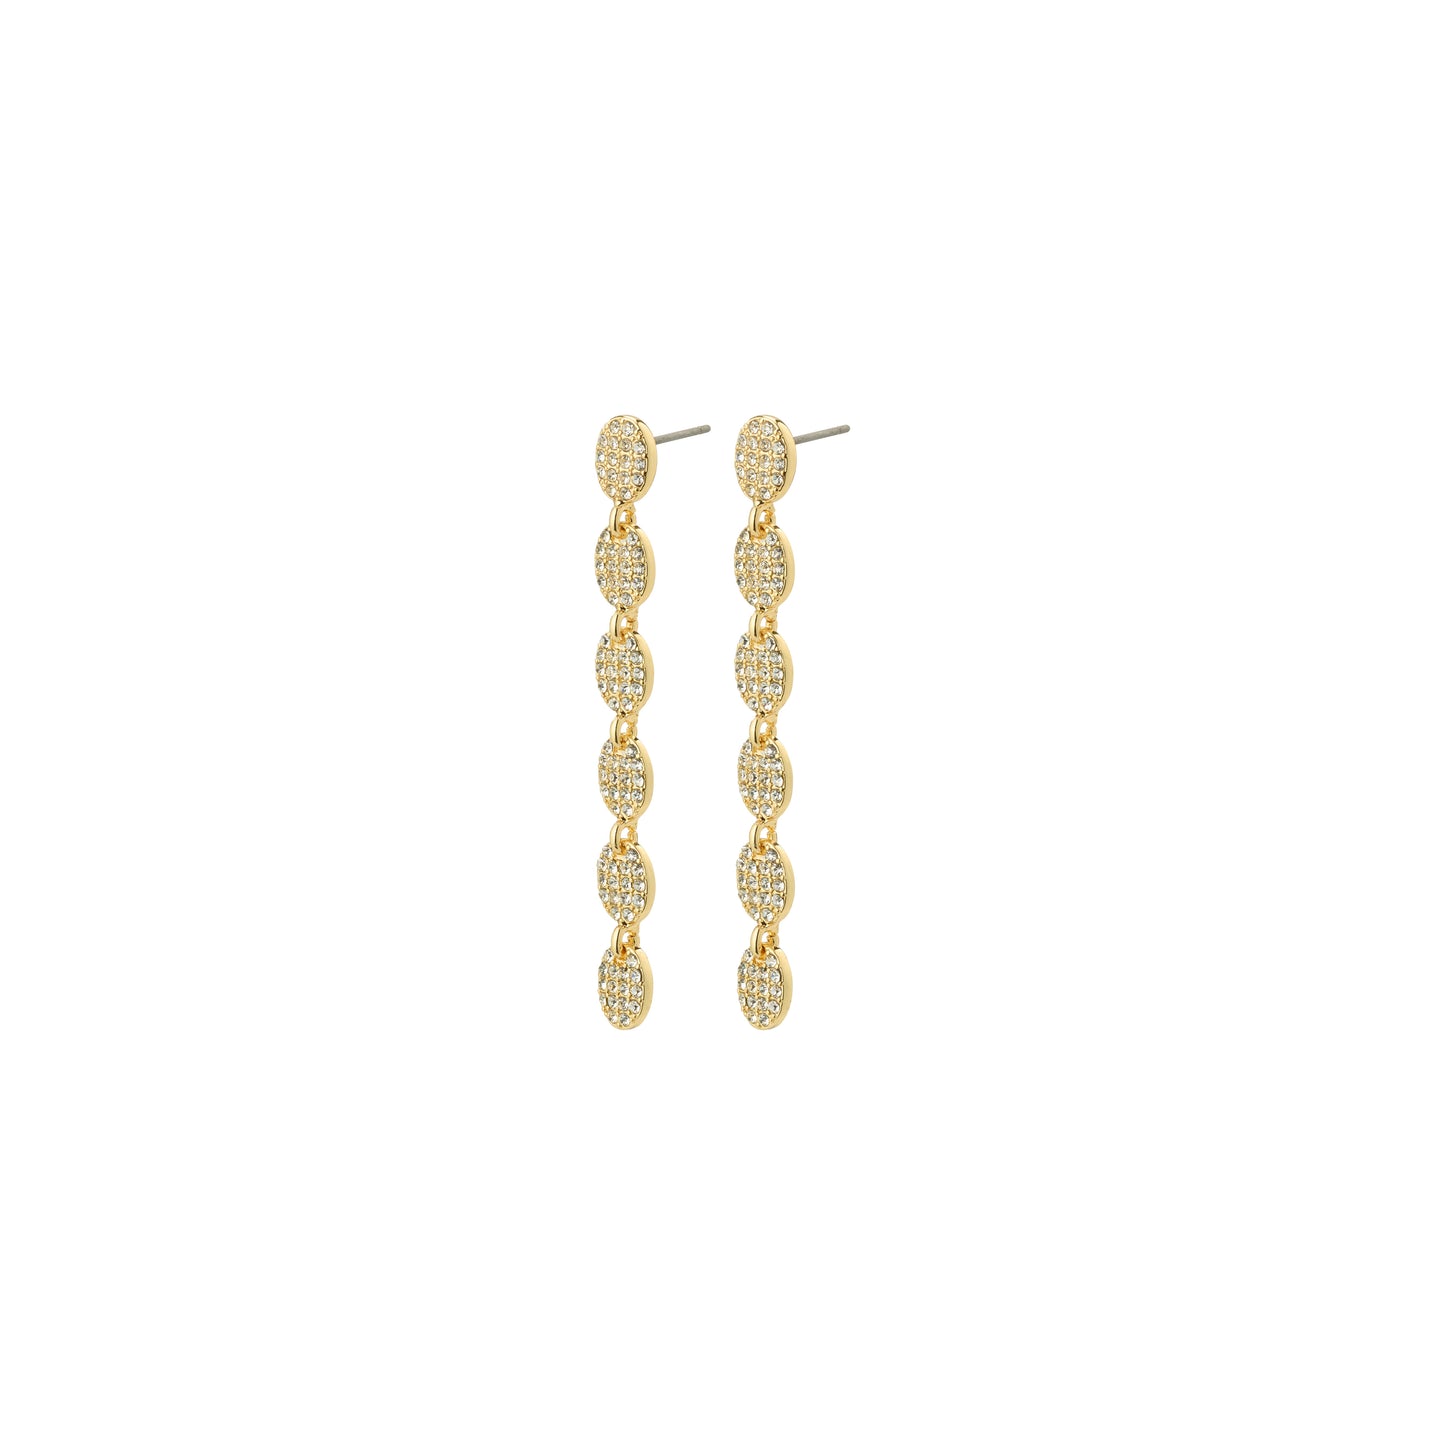 BEAT recycled crystal earrings gold-plated